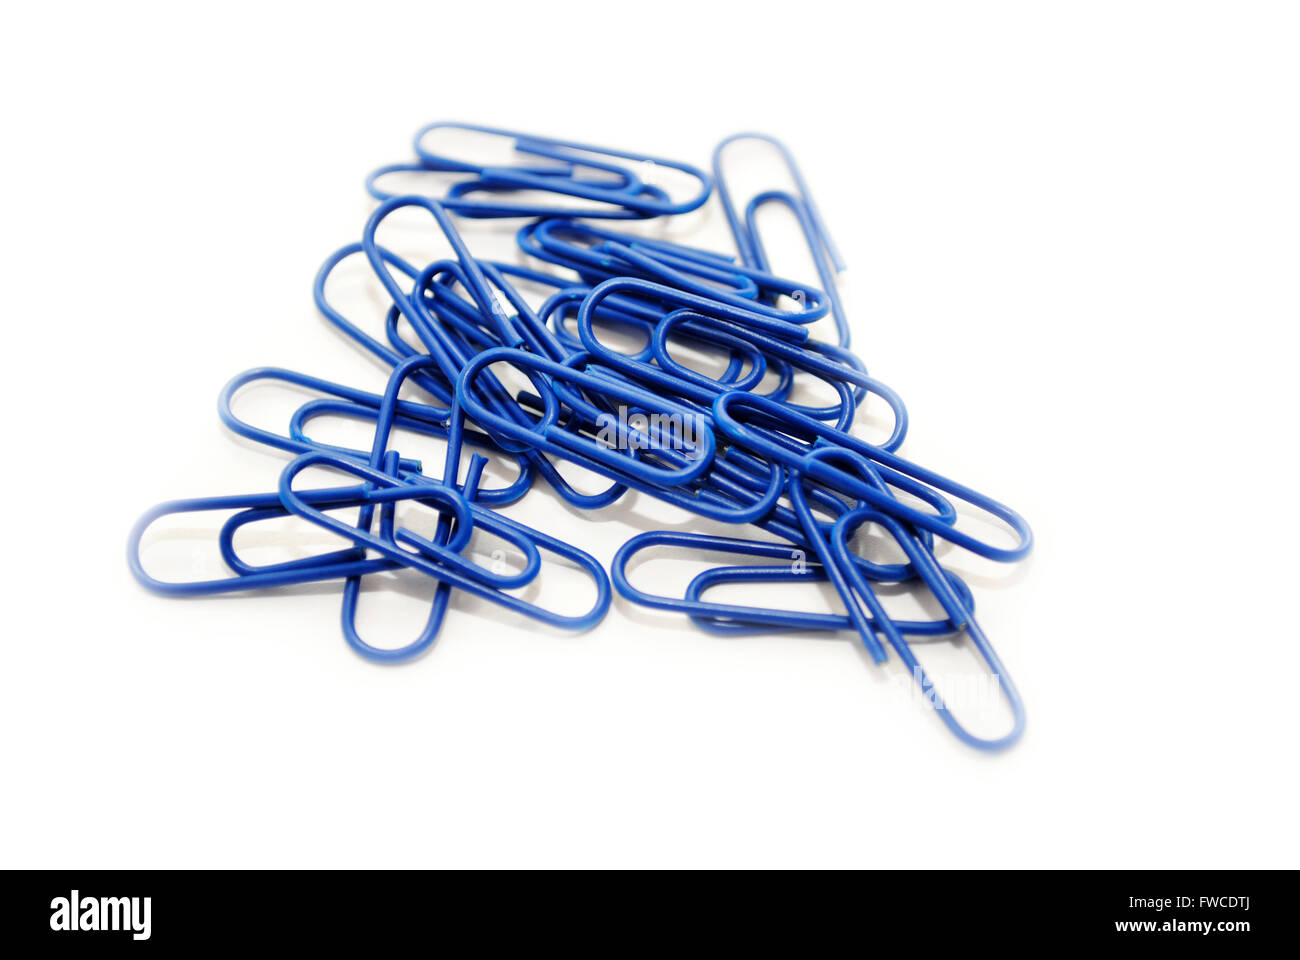 Blue Paper Clips Isolated Over a White Background Stock Photo